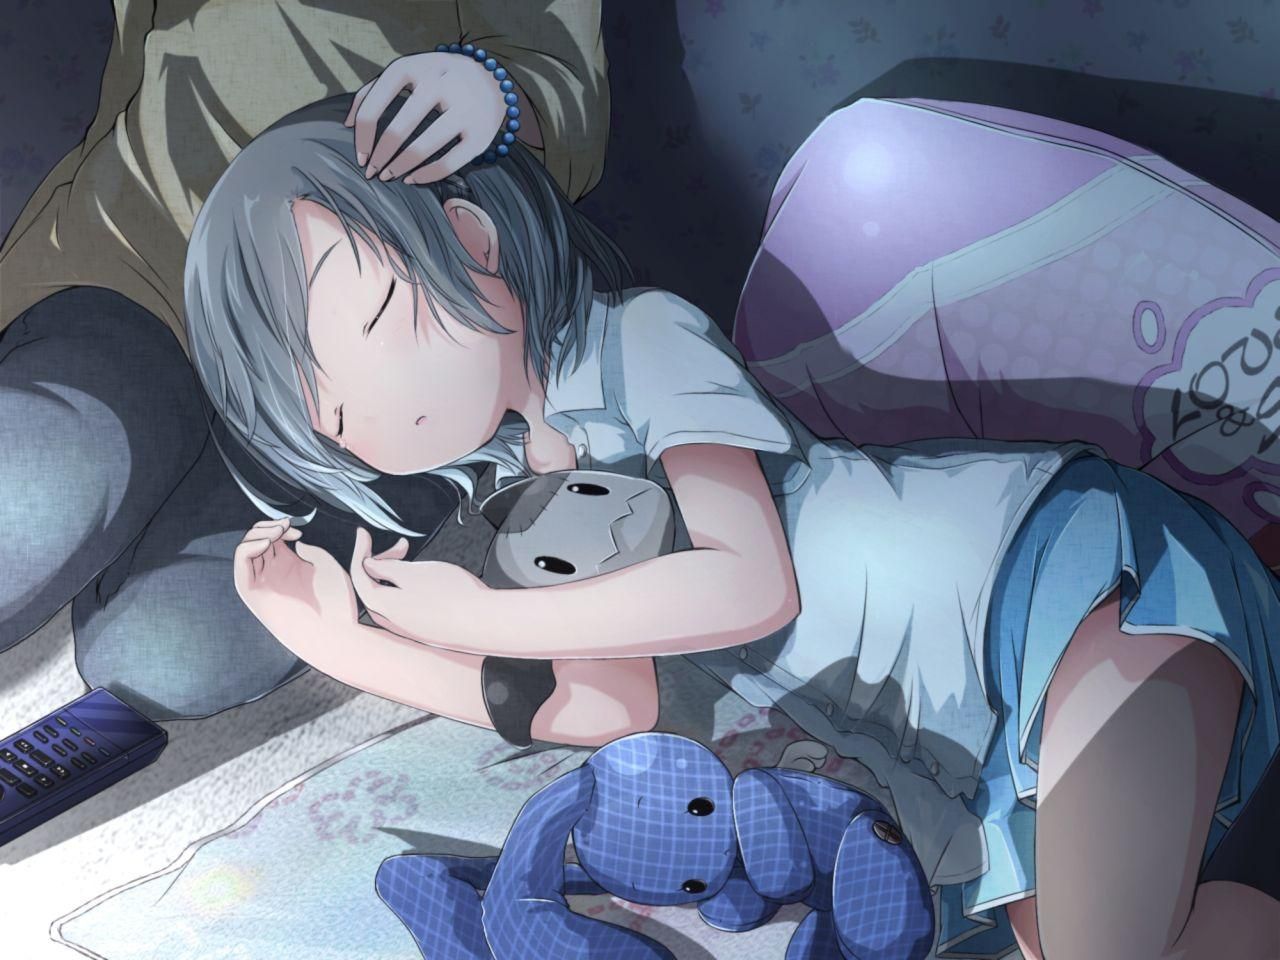 [Secondary] image be healed in the girl's cute sleeping face 6